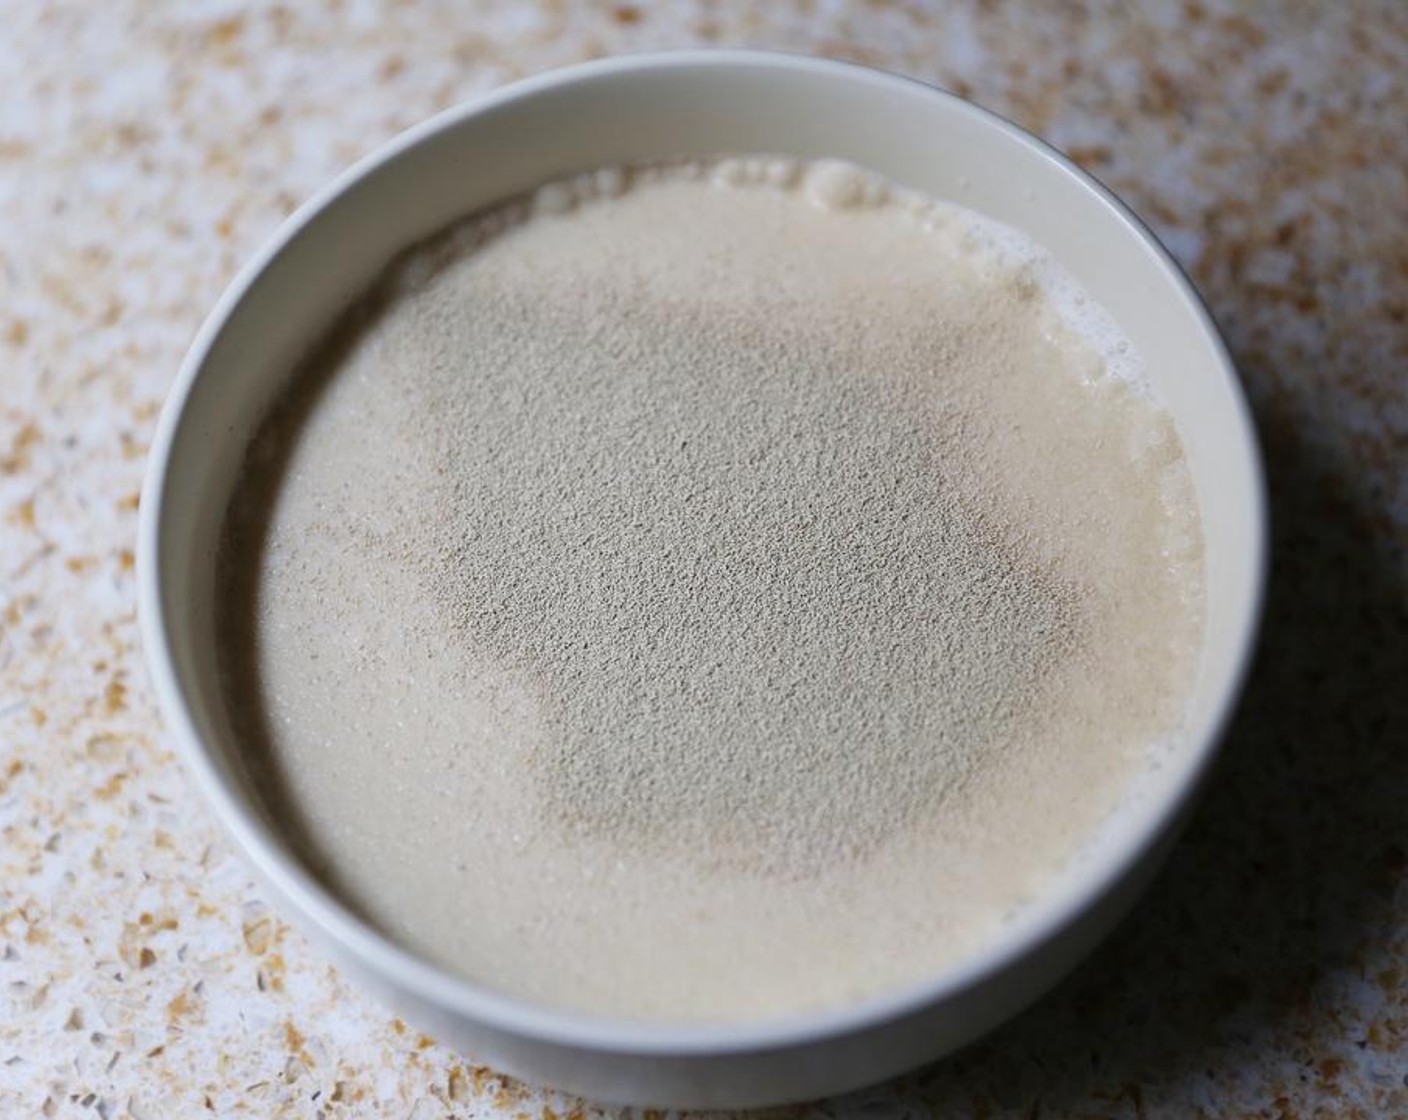 step 1 Warm the Milk (1 1/2 cups) to around 115 degrees F (45 degrees C). Add to a small bowl, add the Granulated Sugar (1 pinch) and sprinkle over Instant Dry Yeast (1/2 Tbsp).